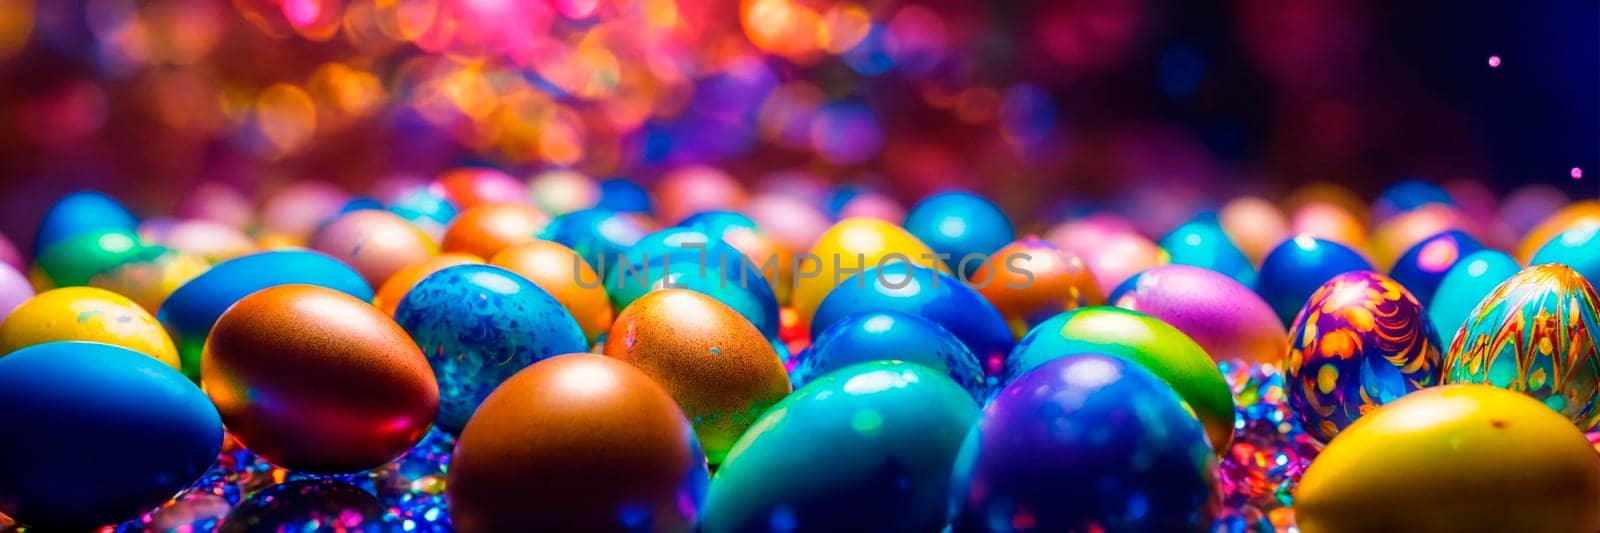 holographic Easter eggs on a shiny background. Selective focus. by yanadjana